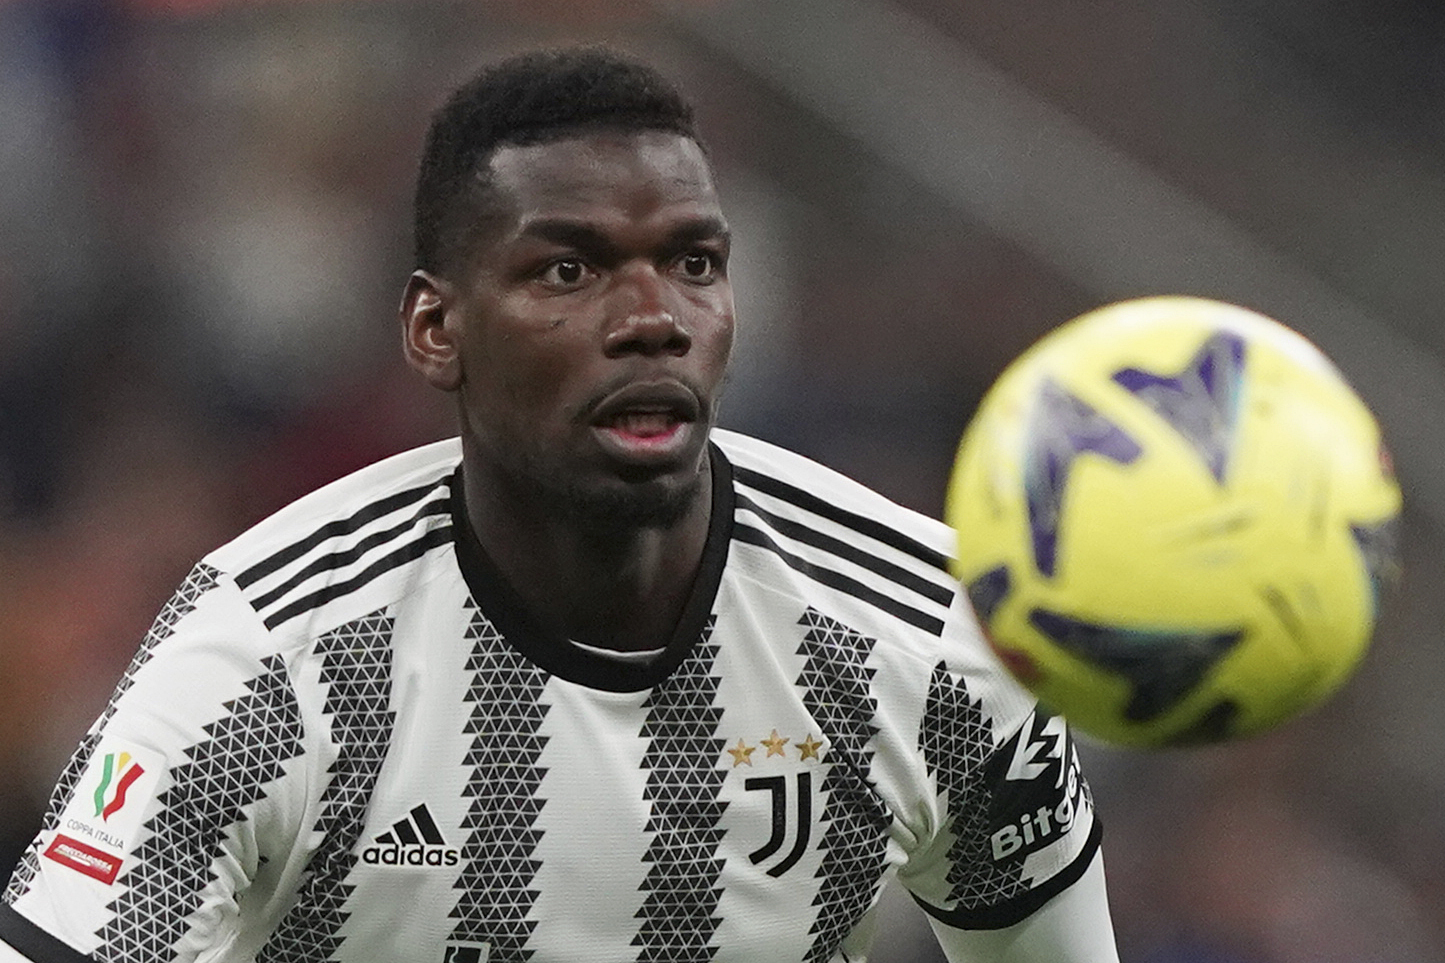 FILE - Juventus' Paul Pogba controls the ball during an Italian Cup soccer match between Internazionale and Juventus, at the Giuseppe Meazza San Siro Stadium, in Milan, Italy, April 26, 2023. Anti-doping prosecutors in Italy requested a four-year ban for Juventus midfielder Paul Pogba on Thursday, Dec. 7, 2023 after the World Cup winner tested positive for testosterone. (Spada/LaPresse via AP, File)